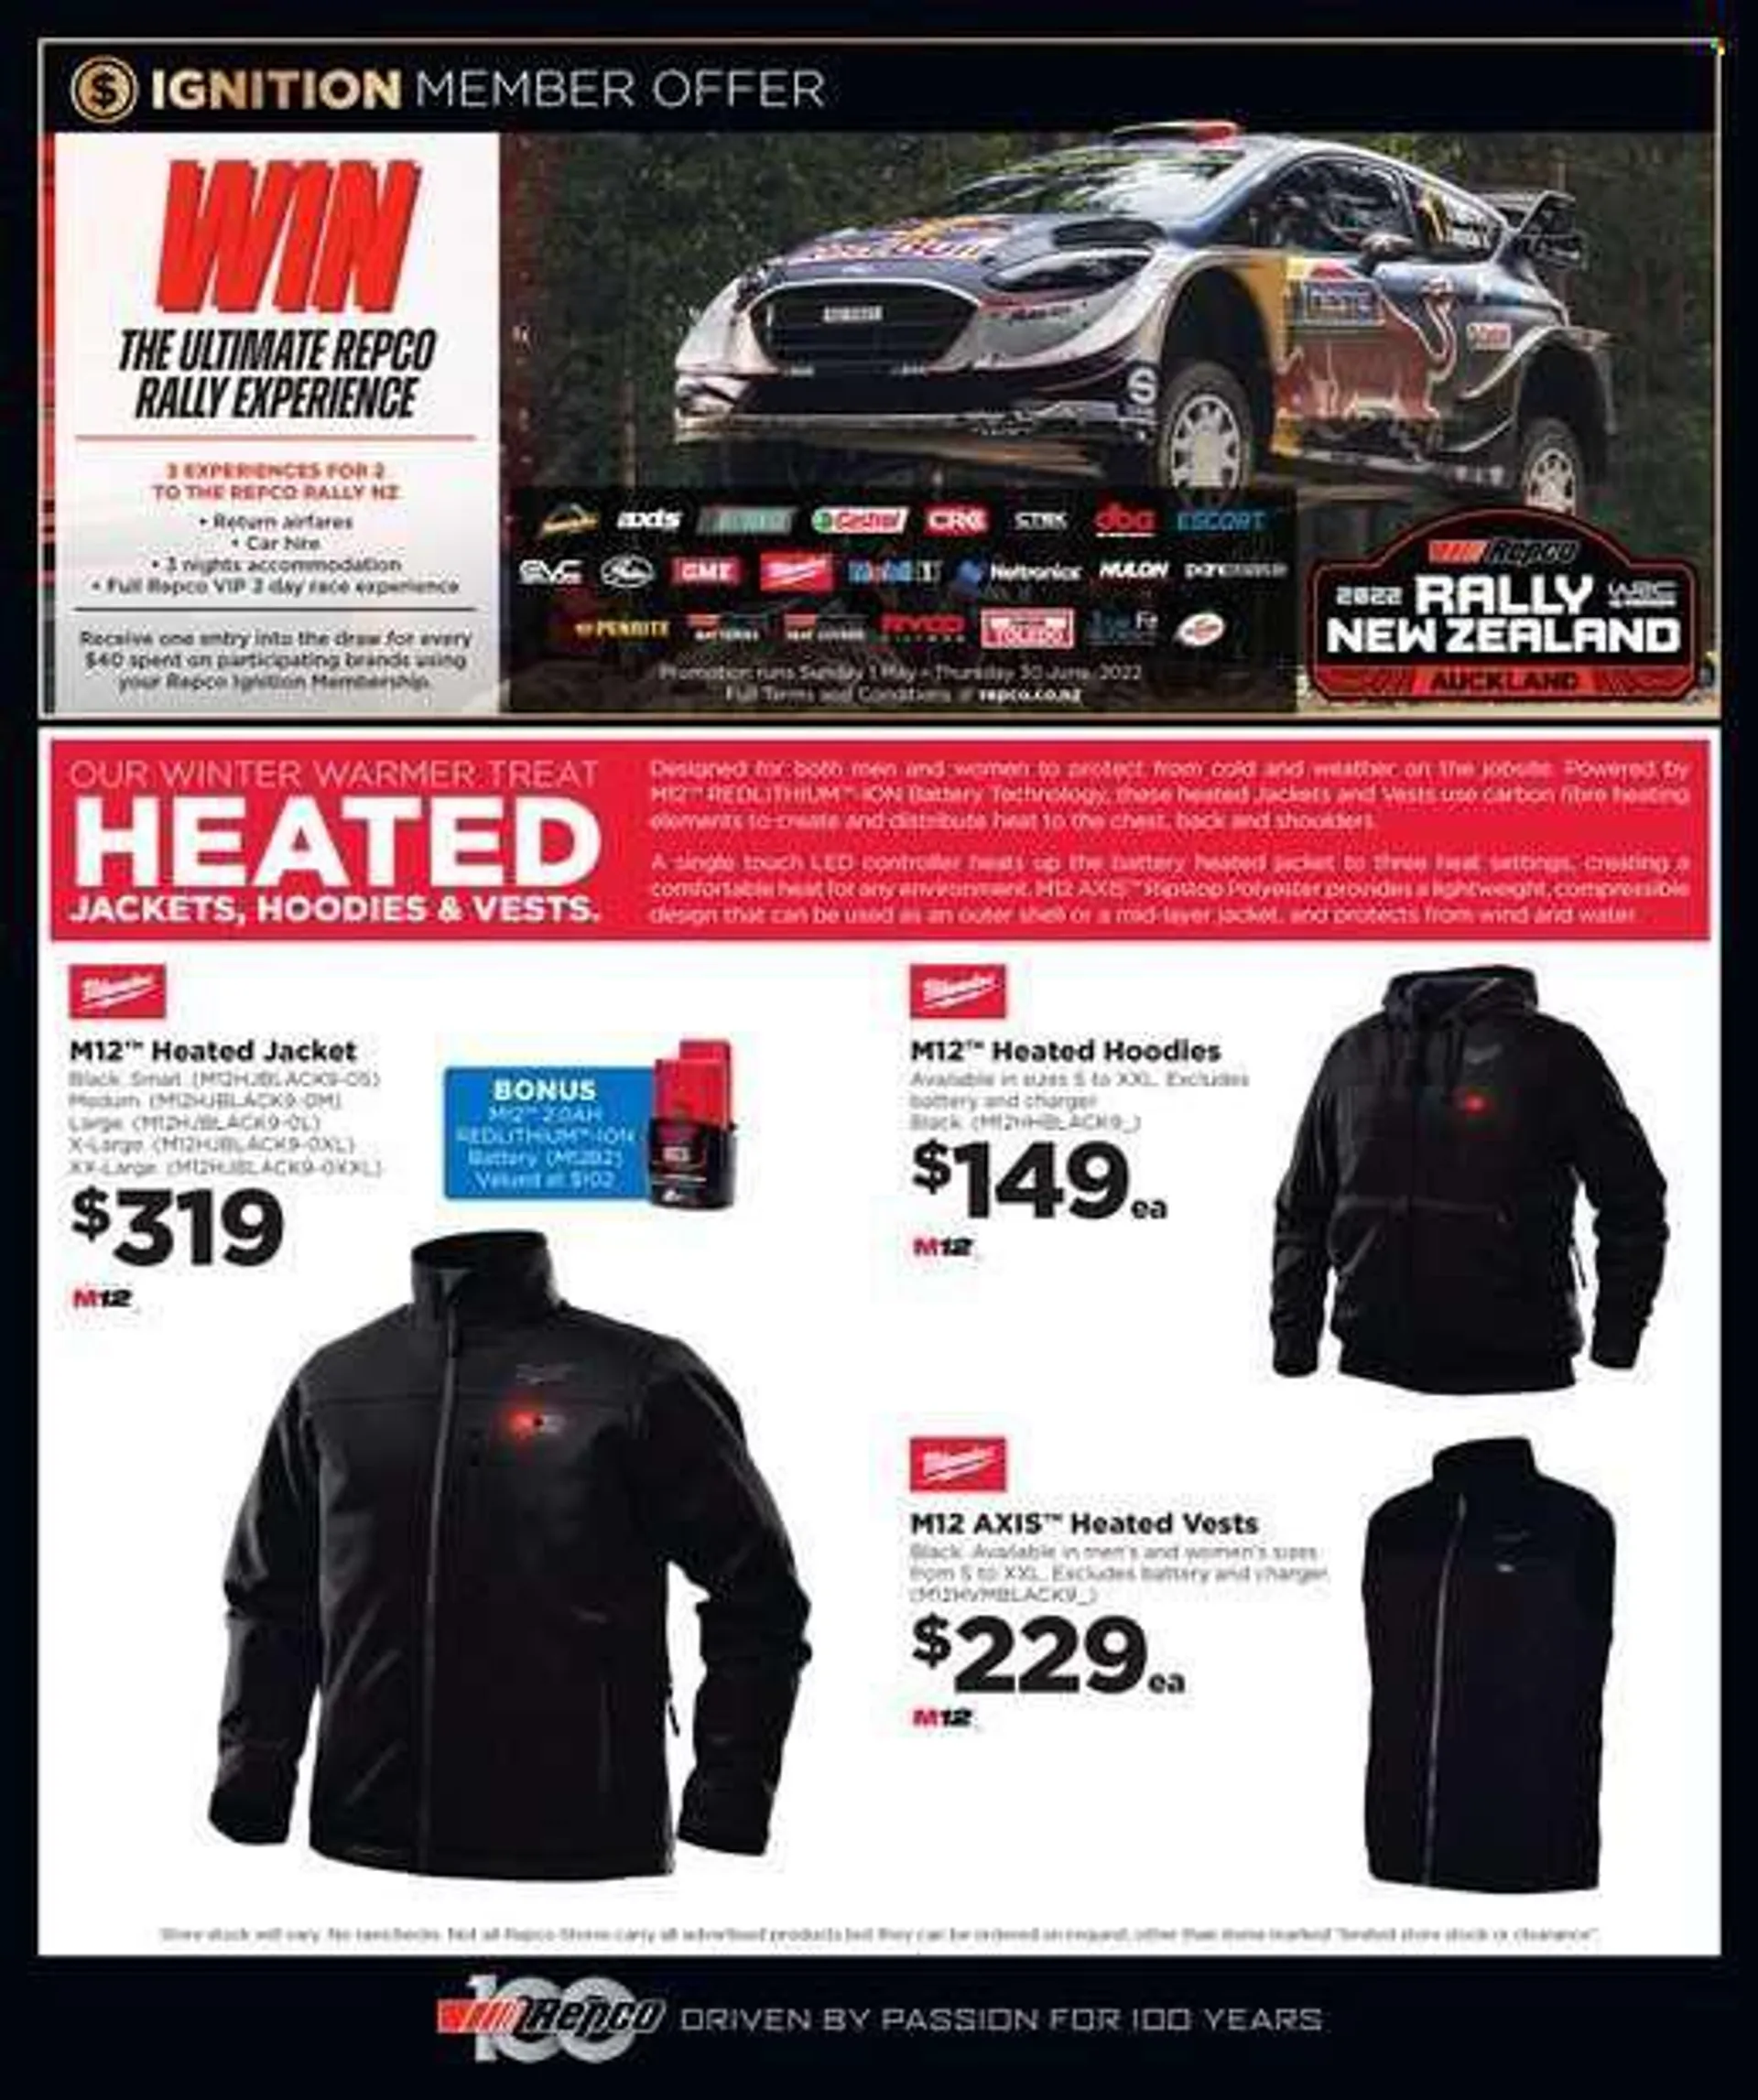 Repco mailer - 01.06.2022 - 14.06.2022. - 1 June 14 June 2022 - Page 8